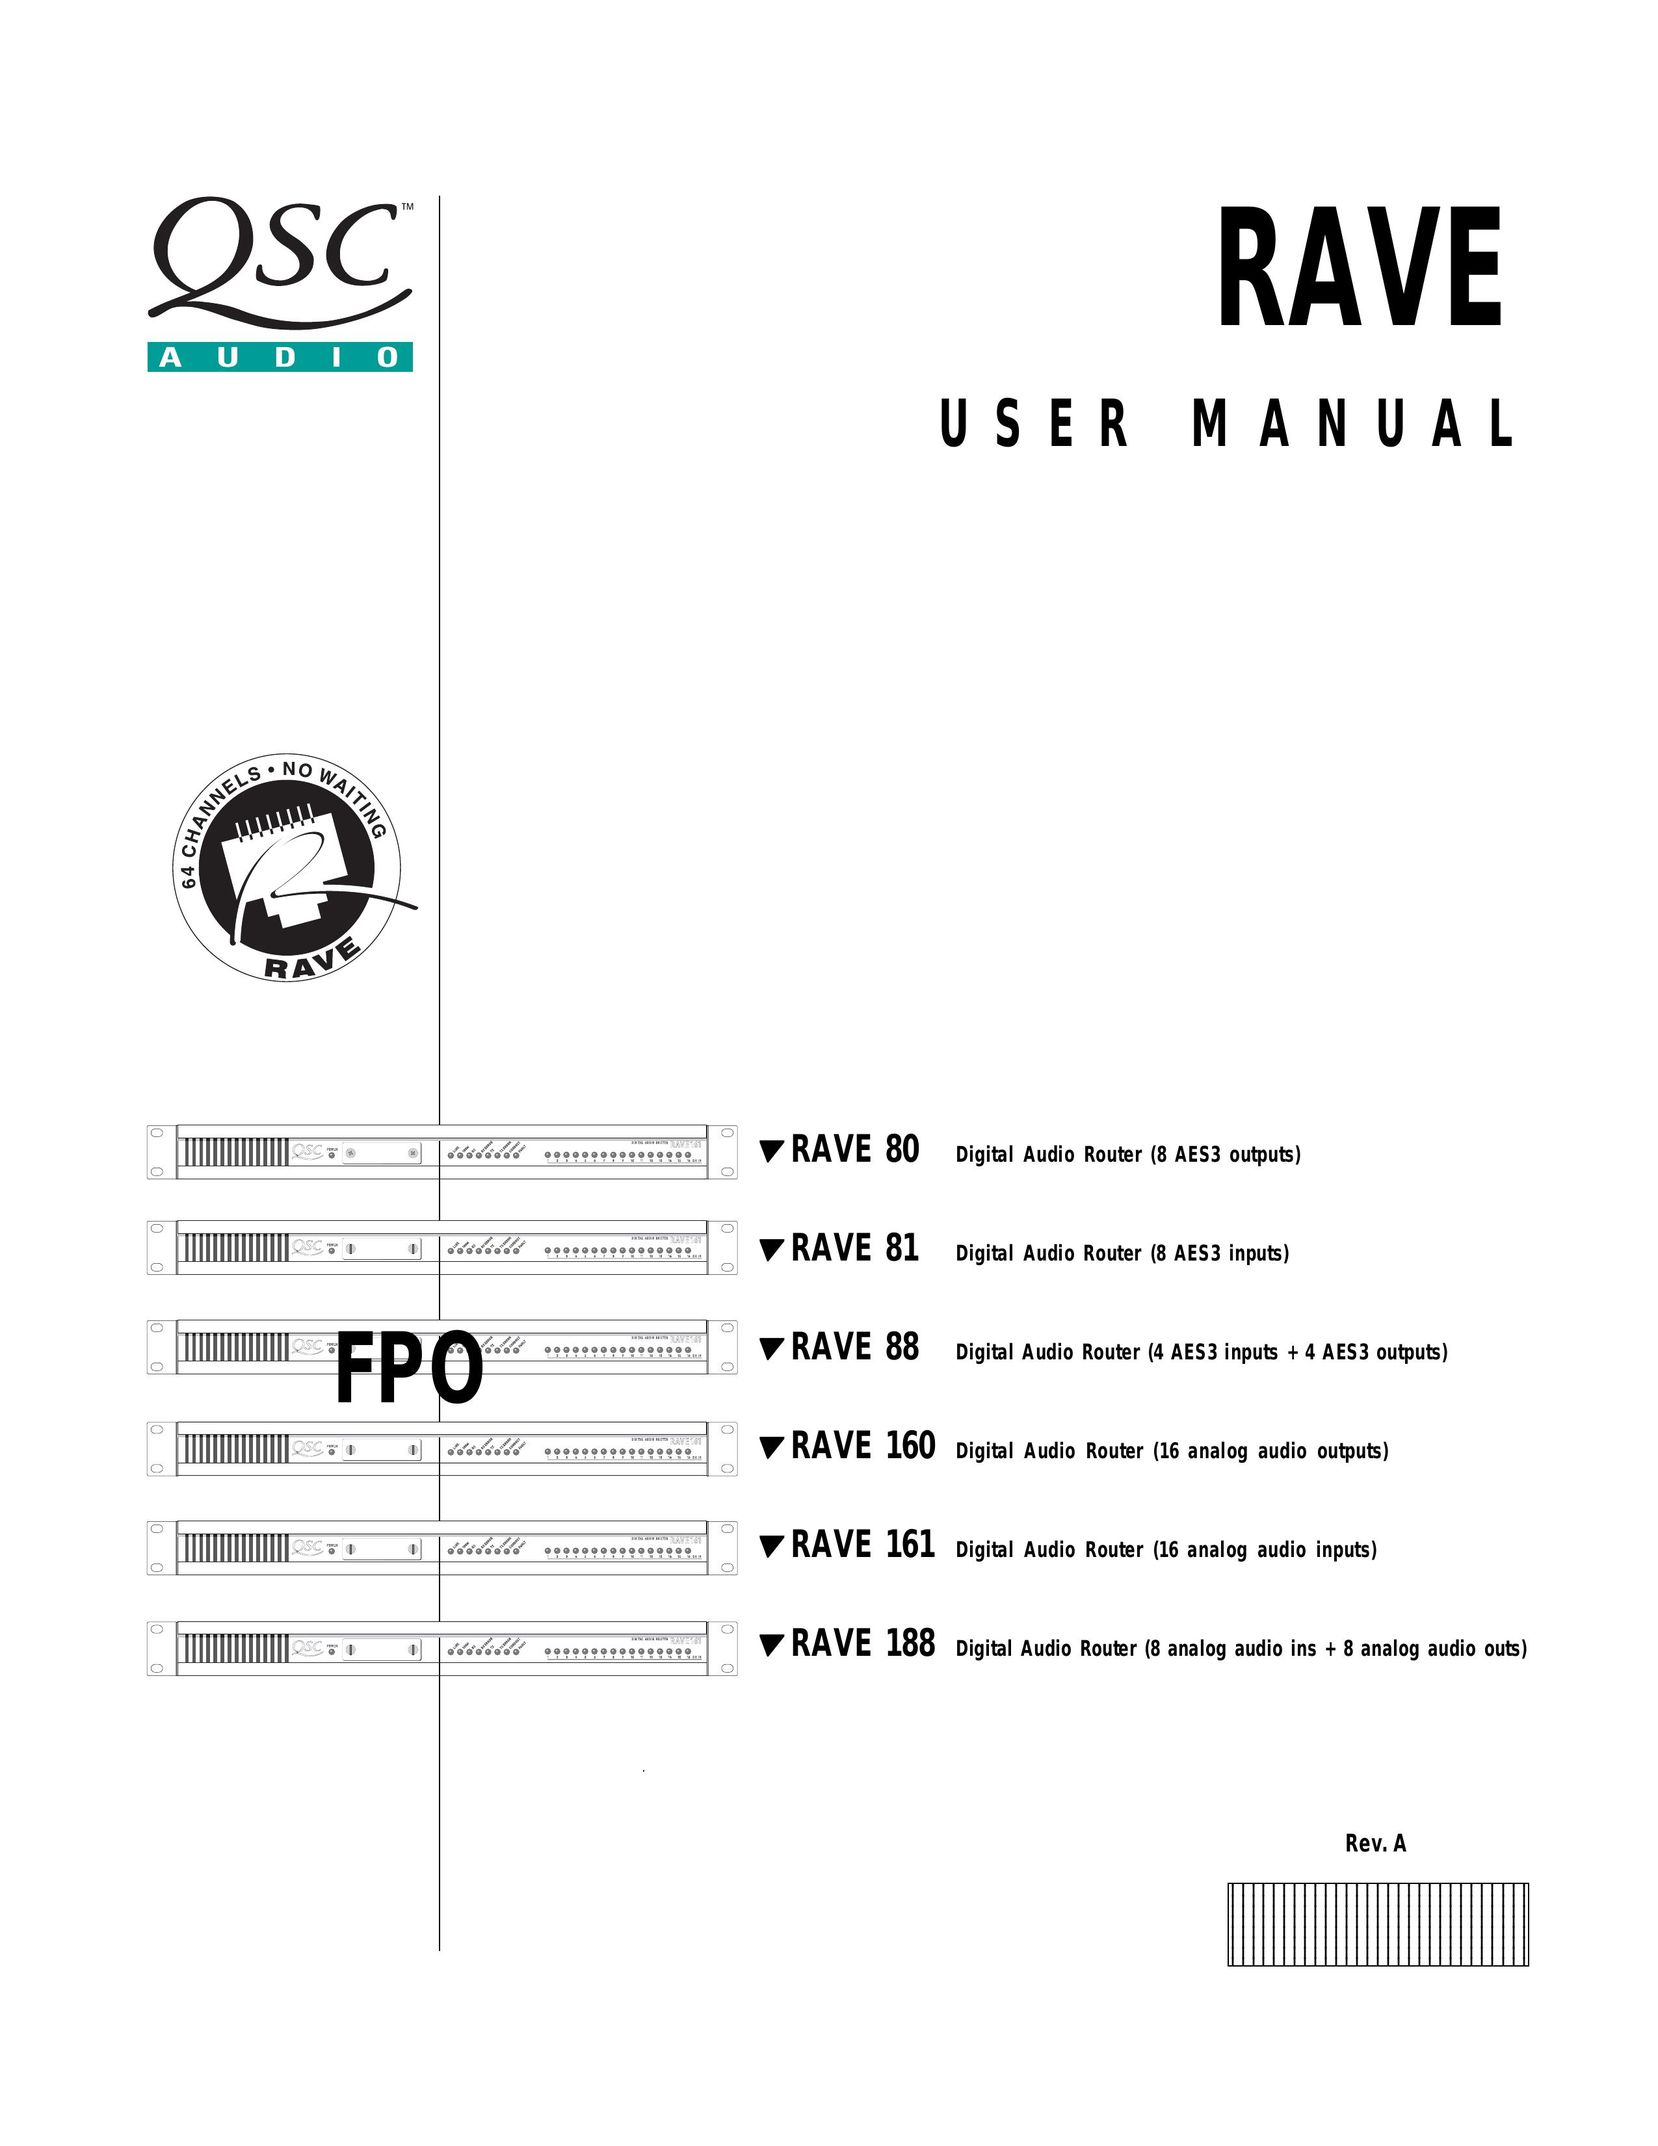 QSC Audio RAVE 81 Network Router User Manual